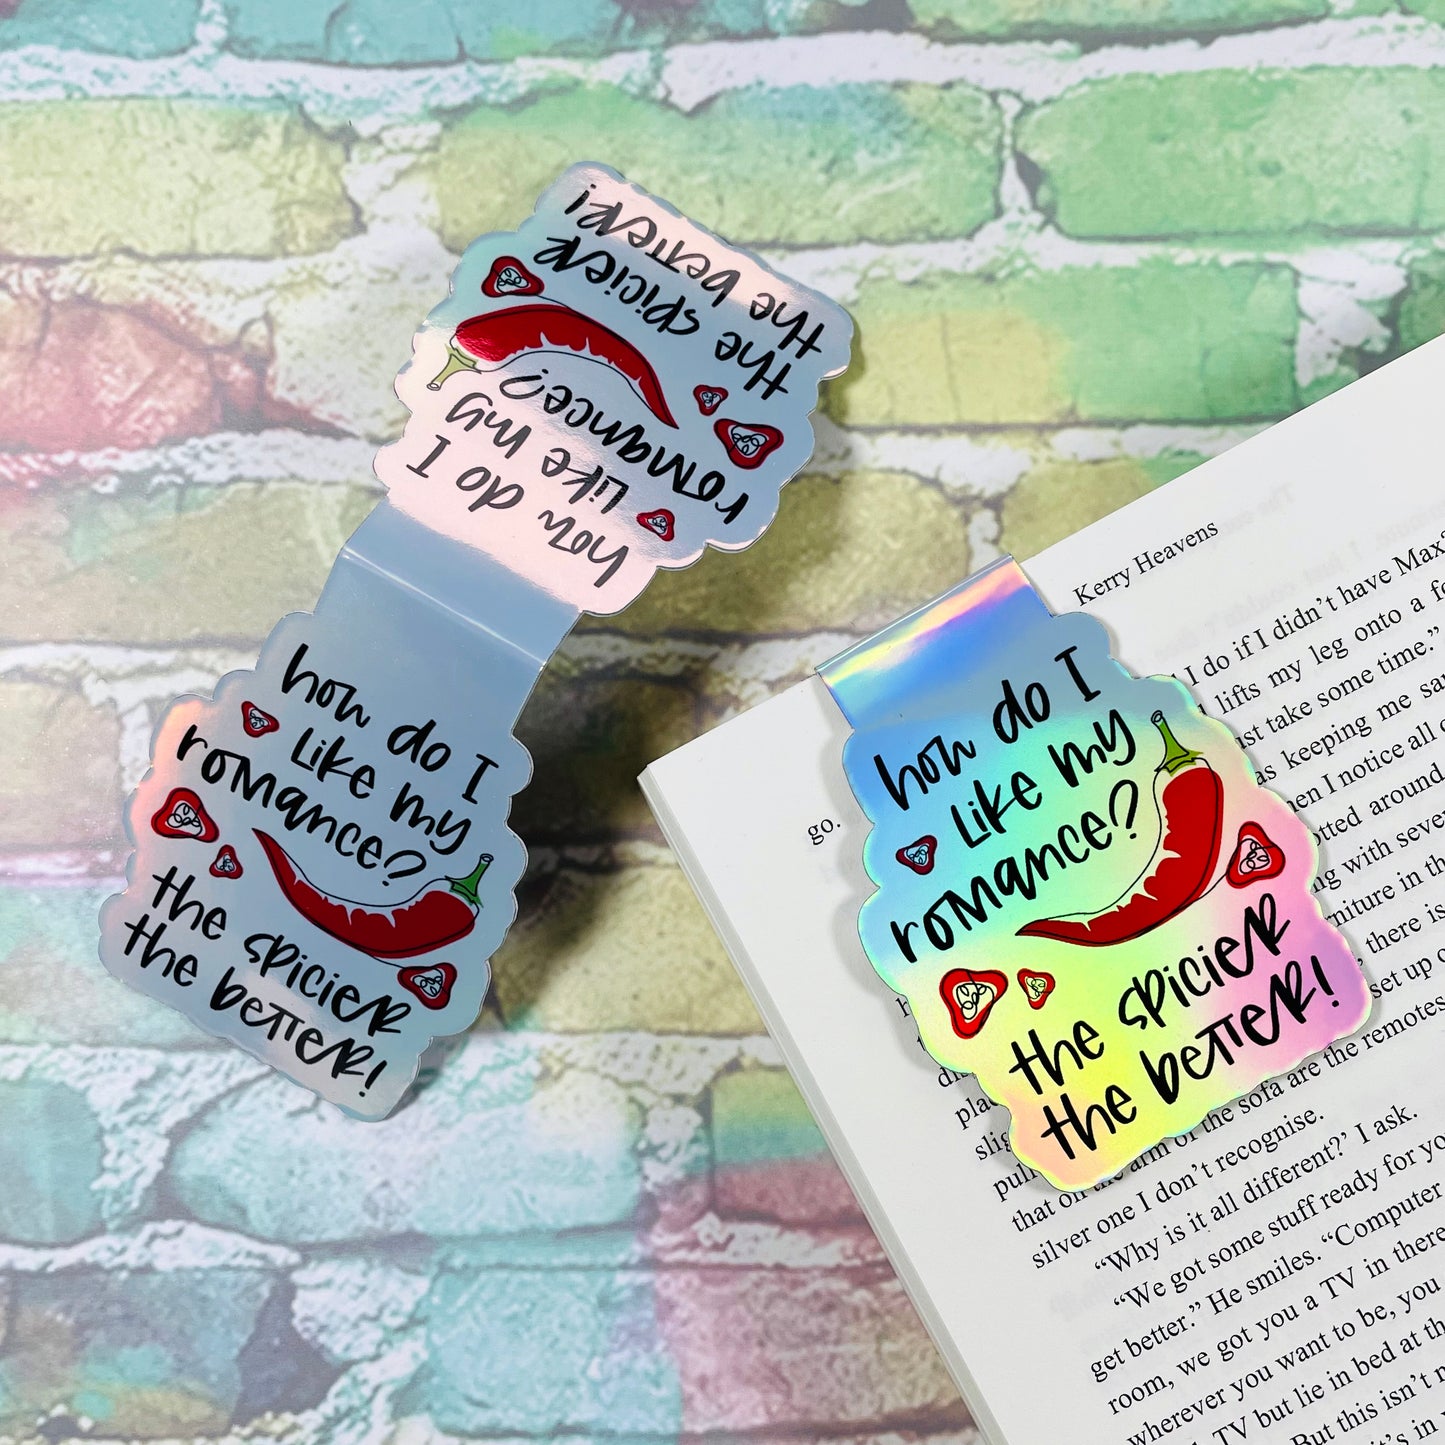 How Do I Like My Romance? The Spicier The Better - Magnetic Bookmark